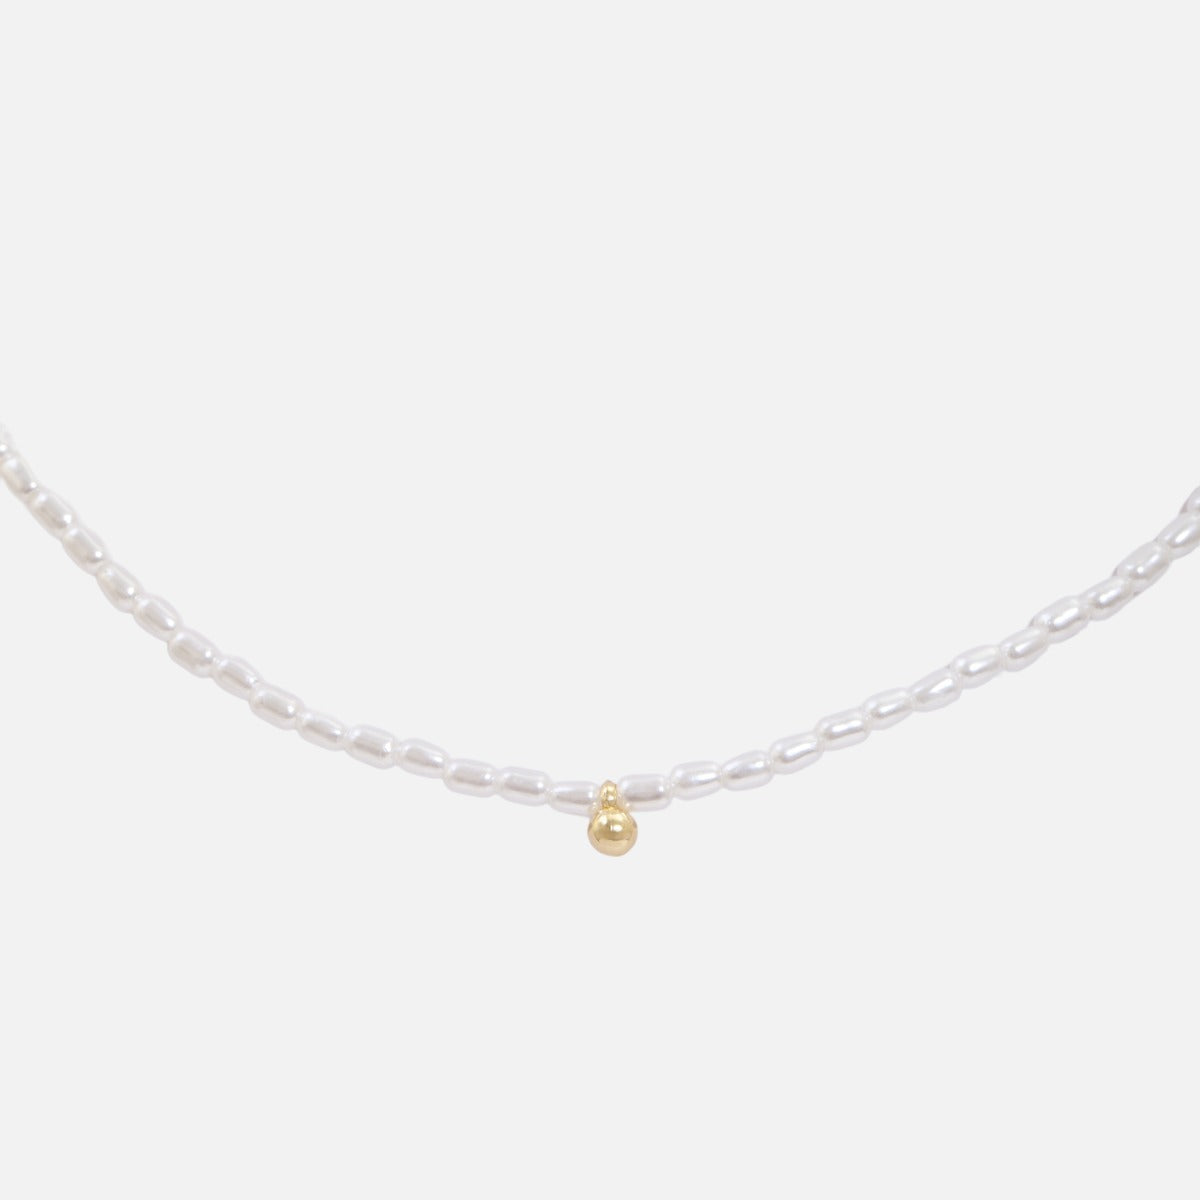 Tiny necklace with small white pearls and golden ball charm